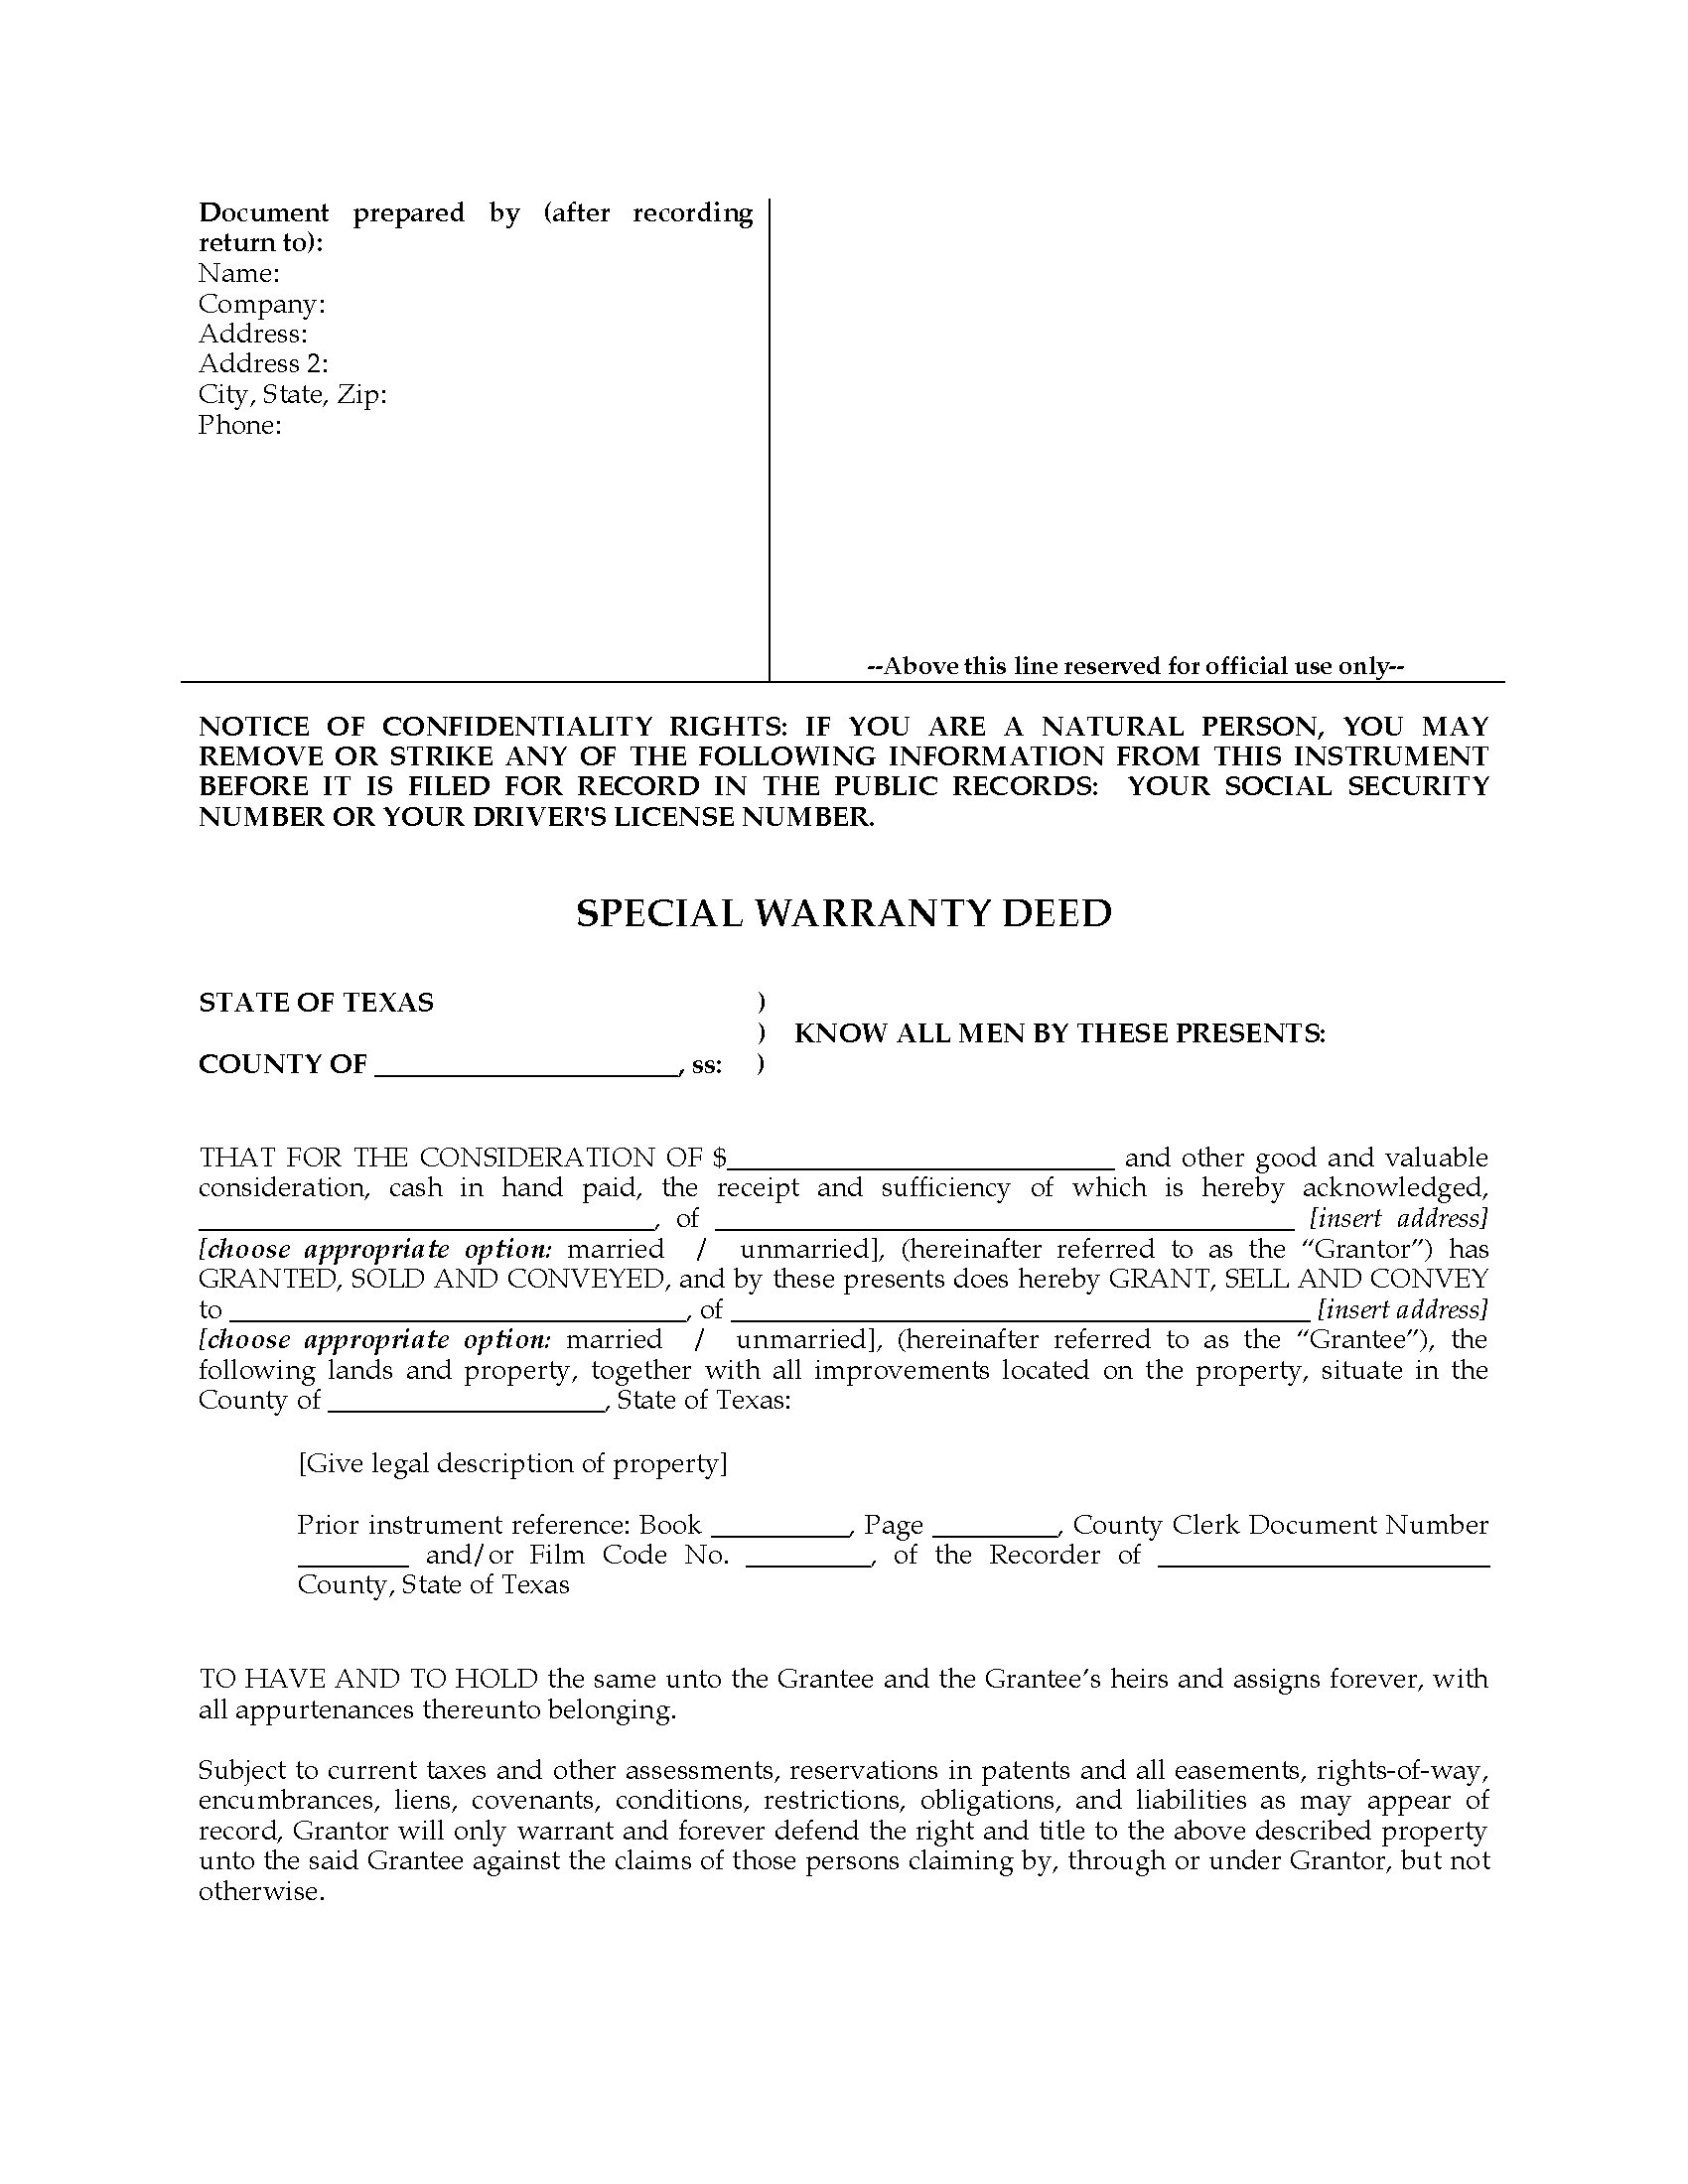 Texas Special Warranty Deed Legal Forms and Business Templates